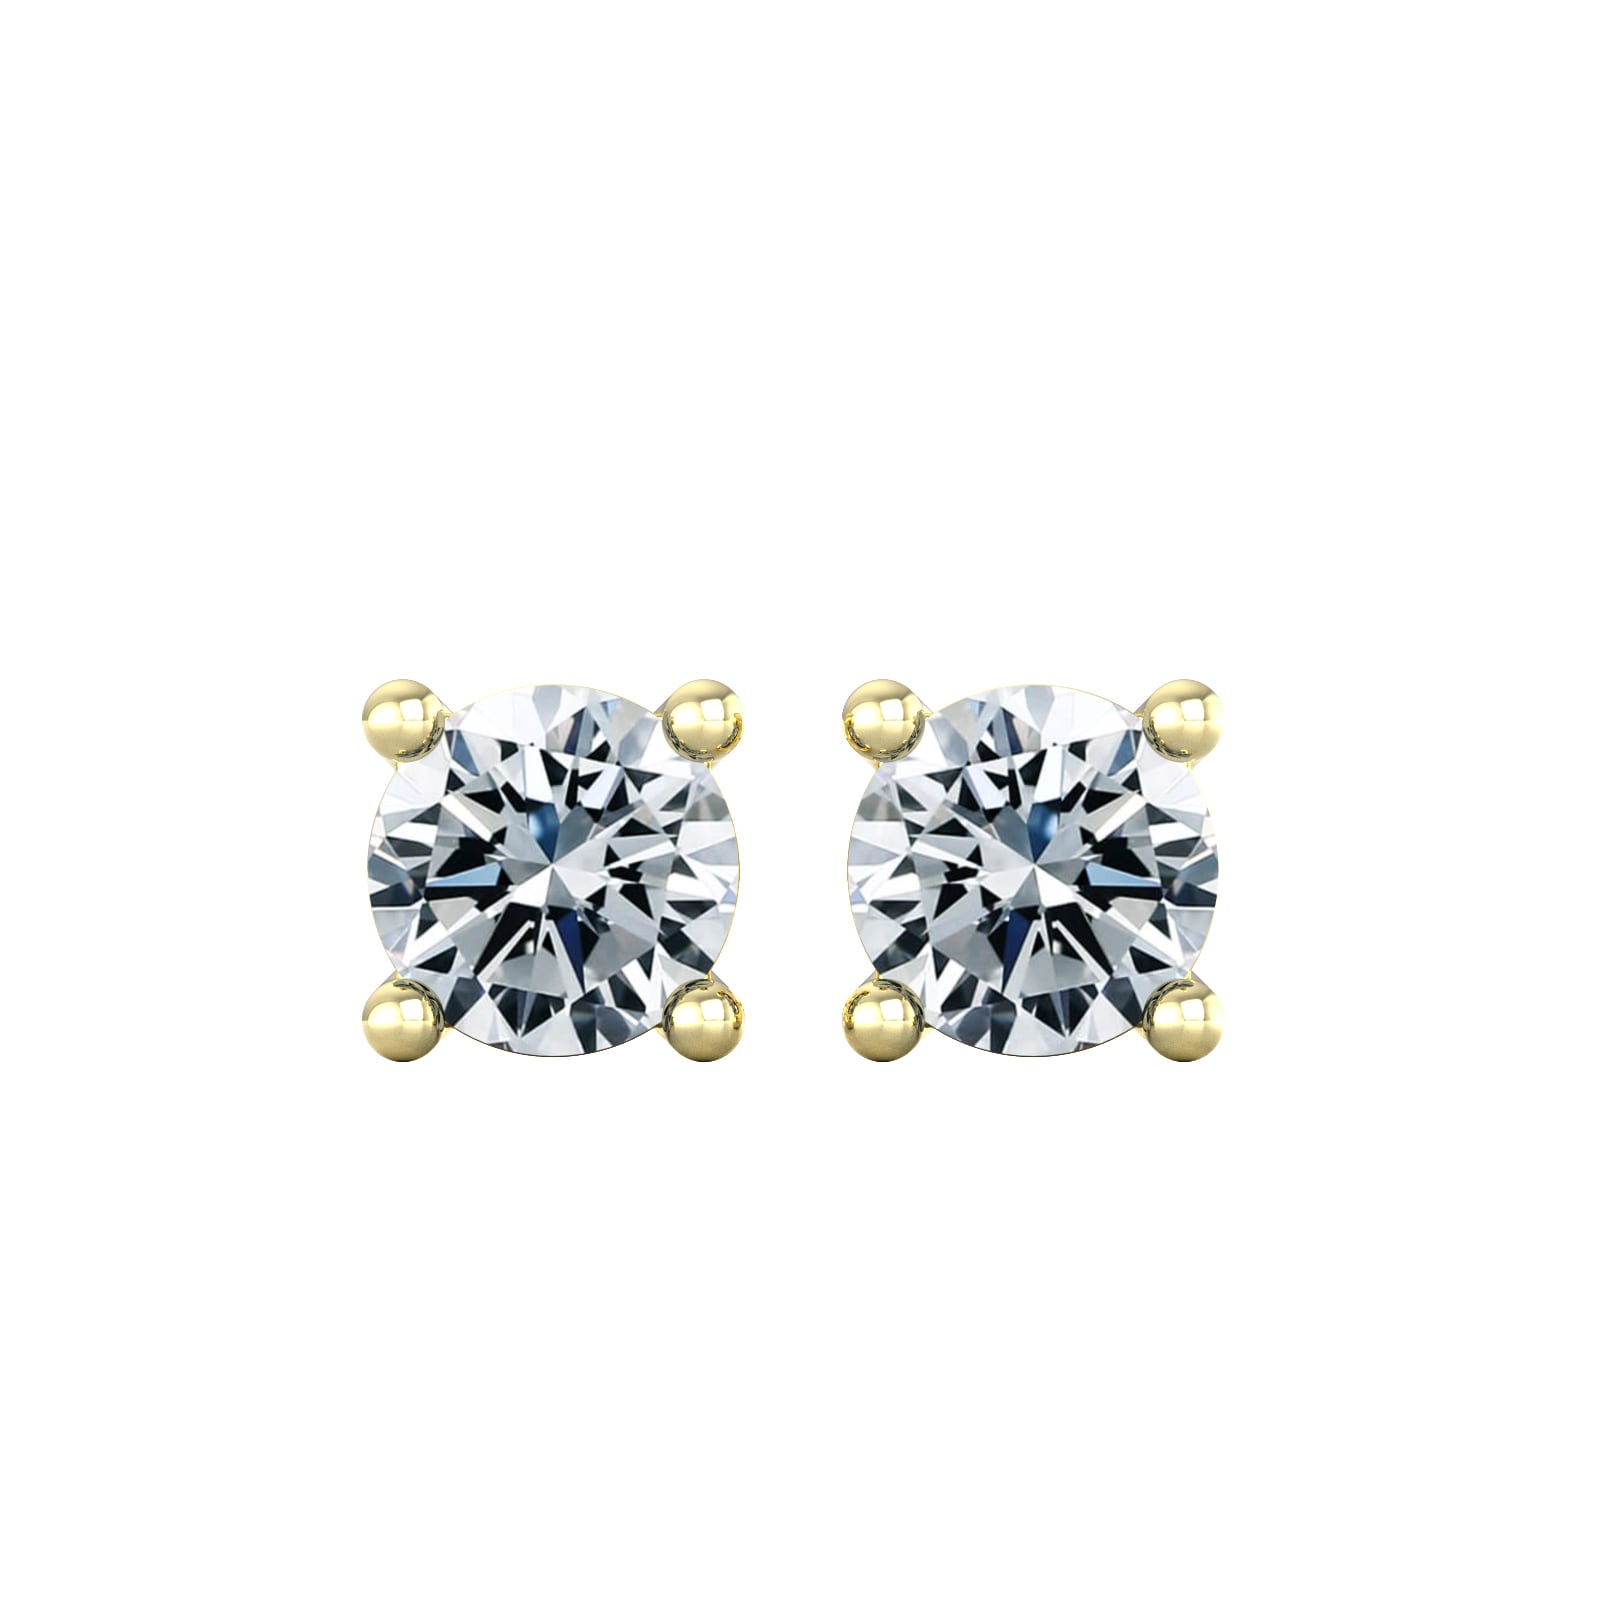 9ct Yellow Gold 0.75cttw Solitaire Diamond Stud Earrings